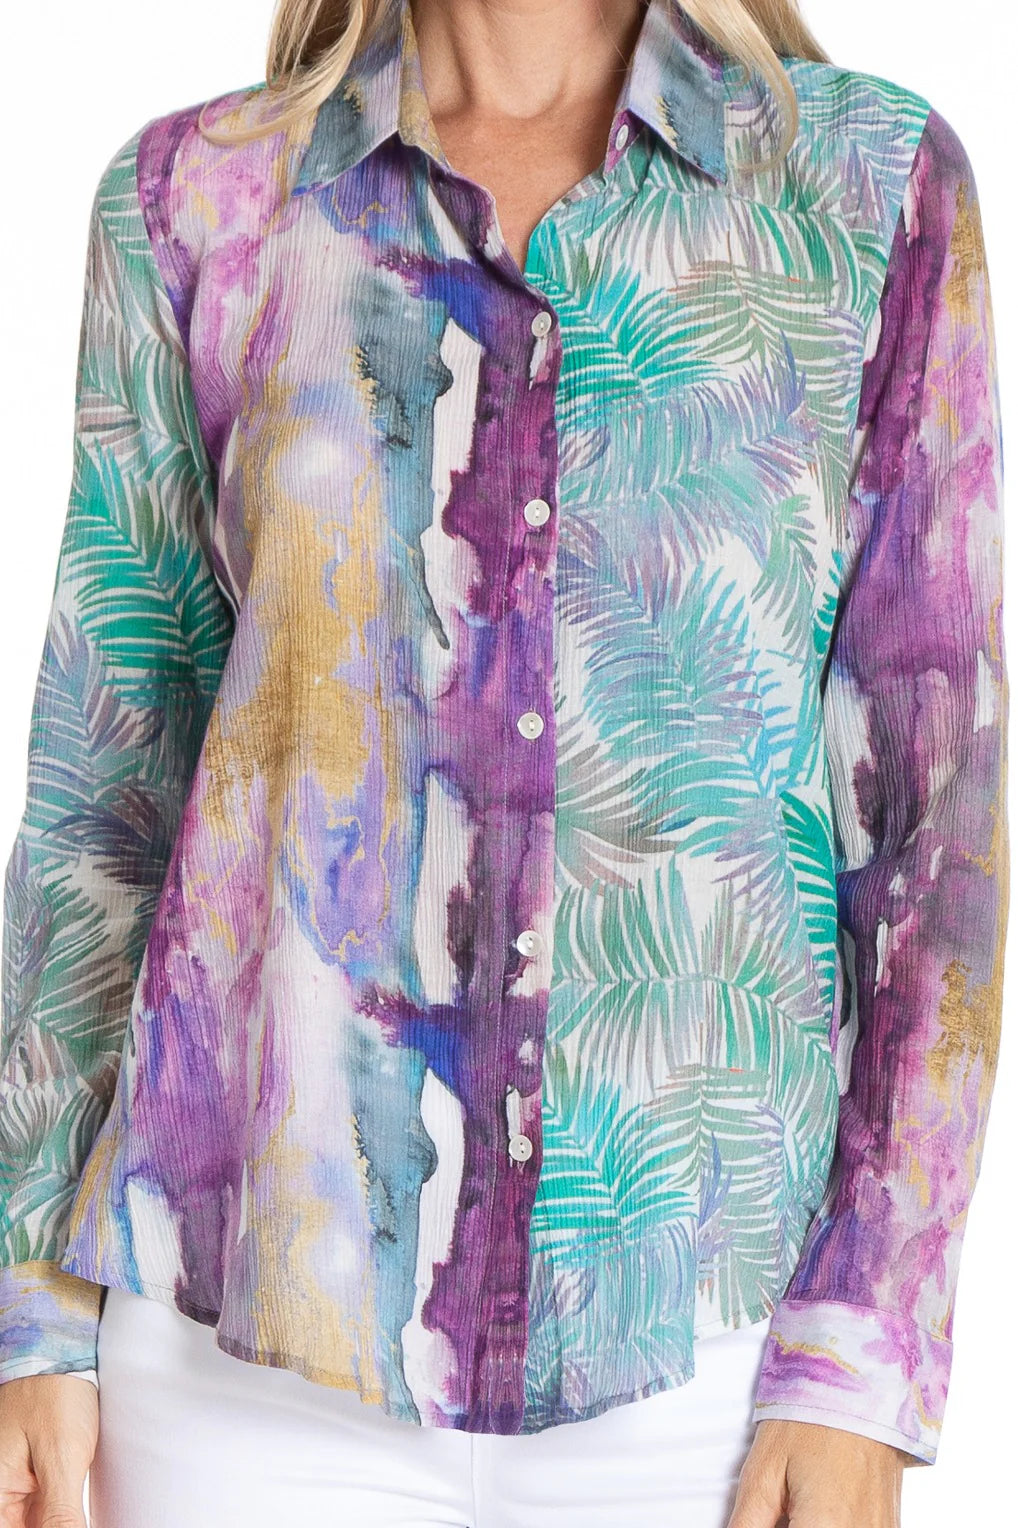 Tropical Palm Mixed Print Button-up with Roll Tab Sleeves Close-up Detail.